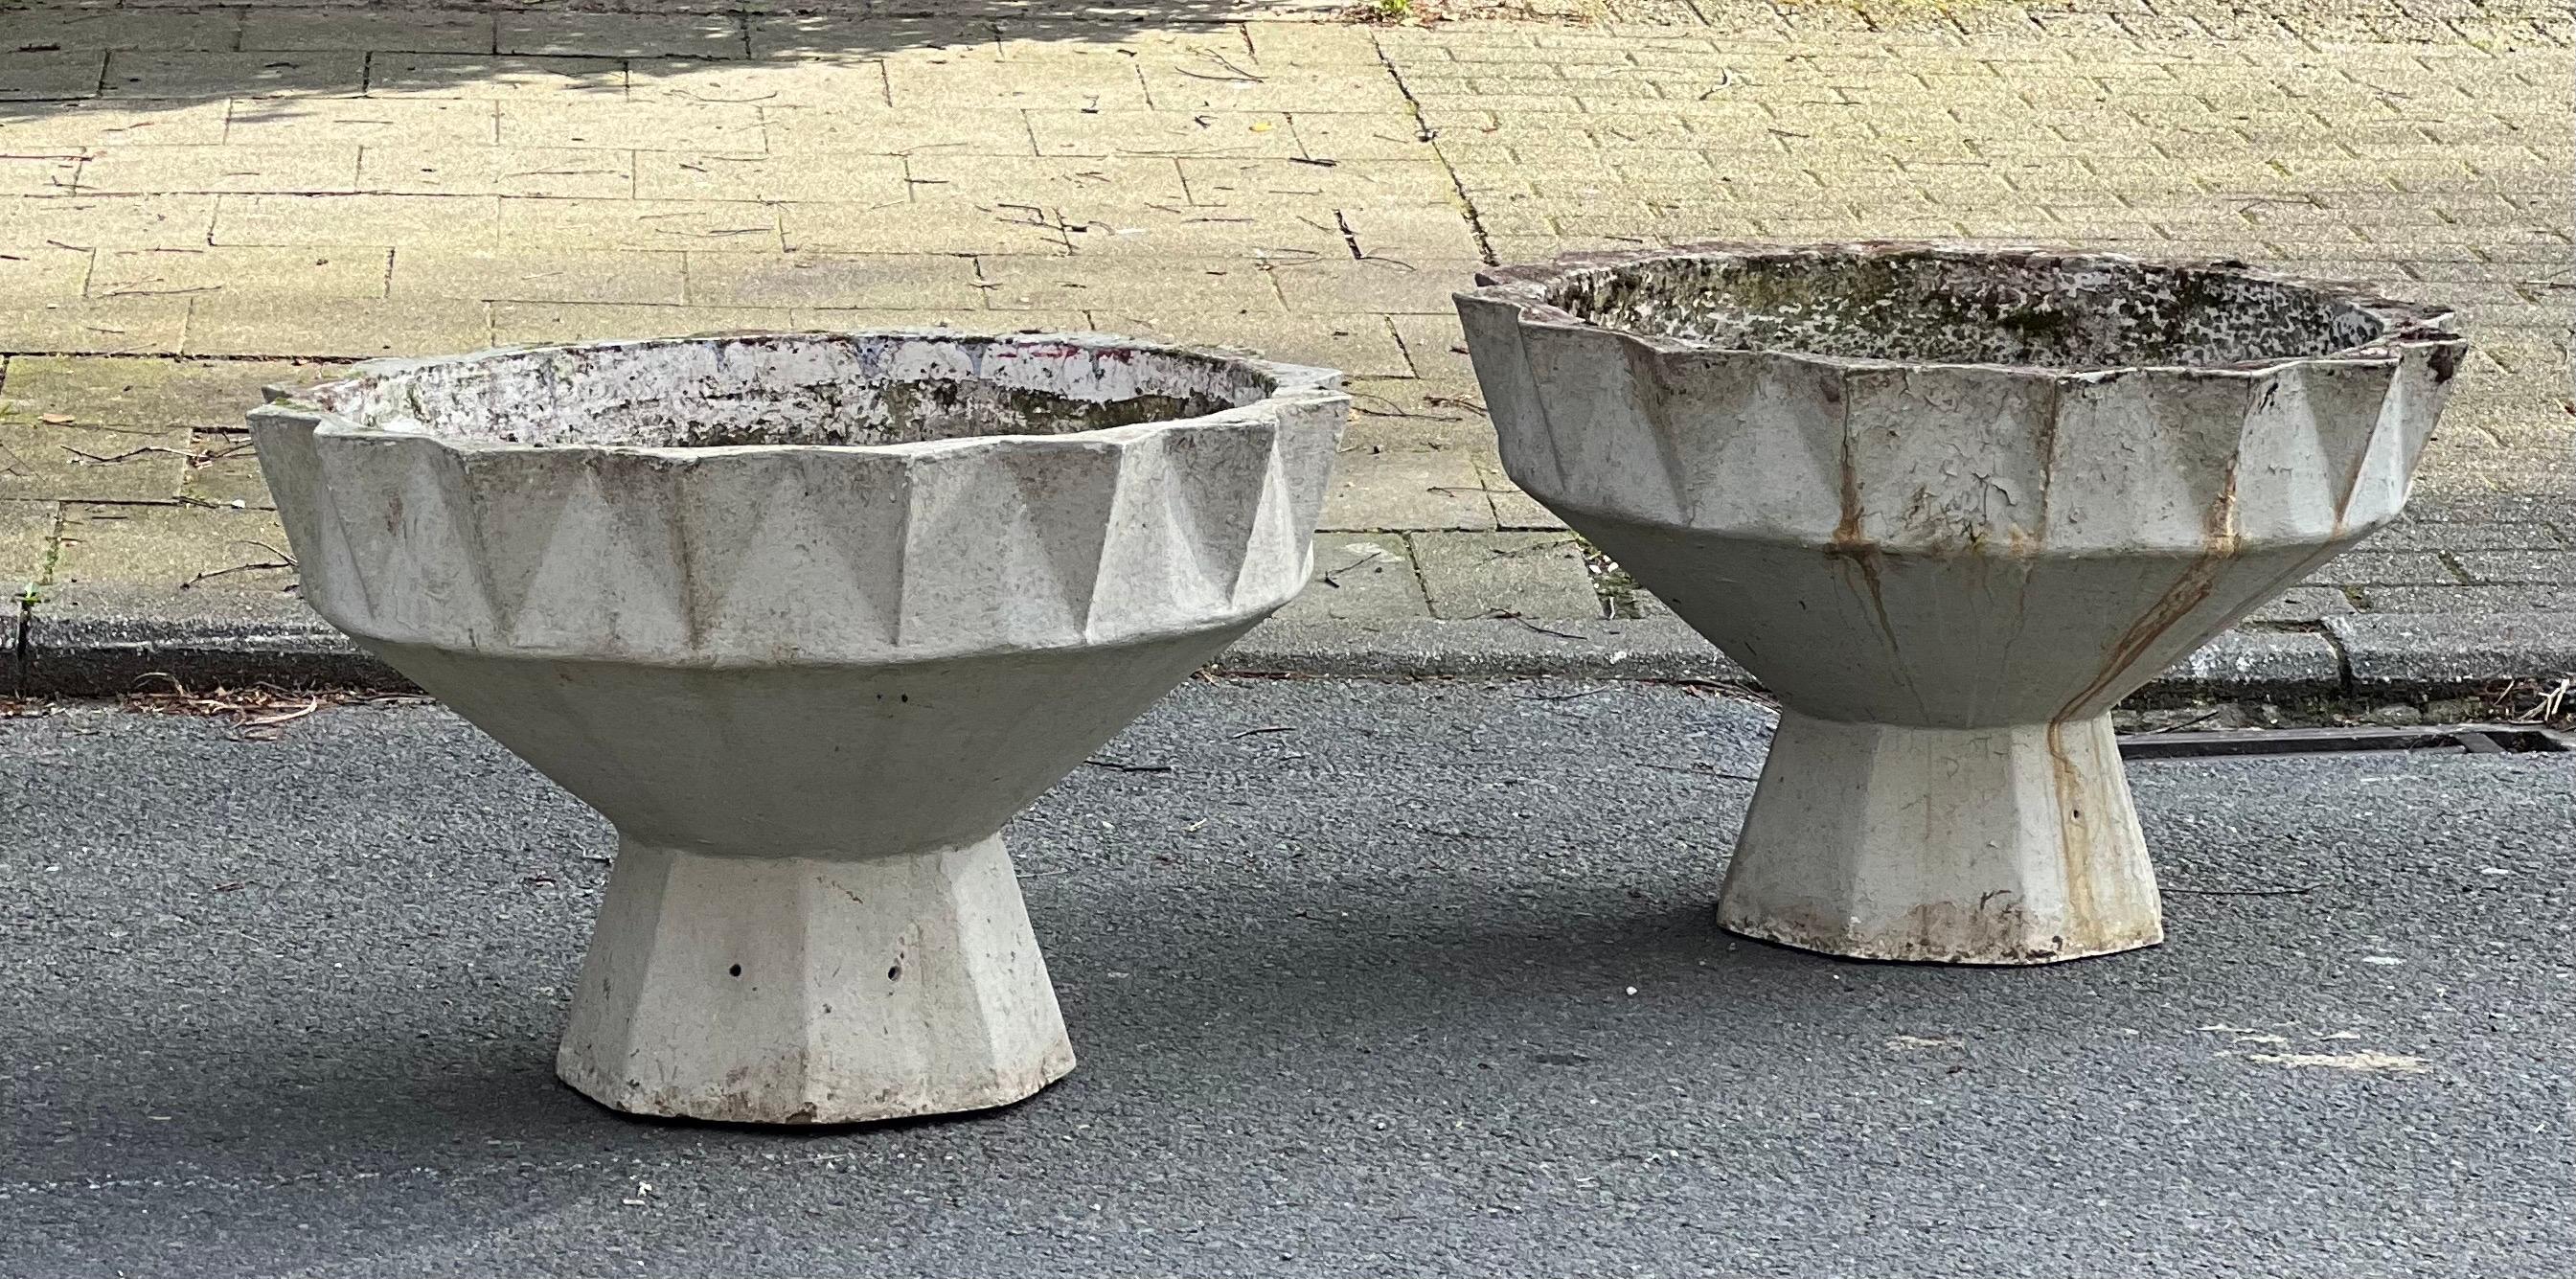 This is a pair of planters created like a sculpture! made out of fiber concrete in the 1950's in Switzerland. It is the second size from that series. We have two of that model and measurements. More models in smaller or bigger scales